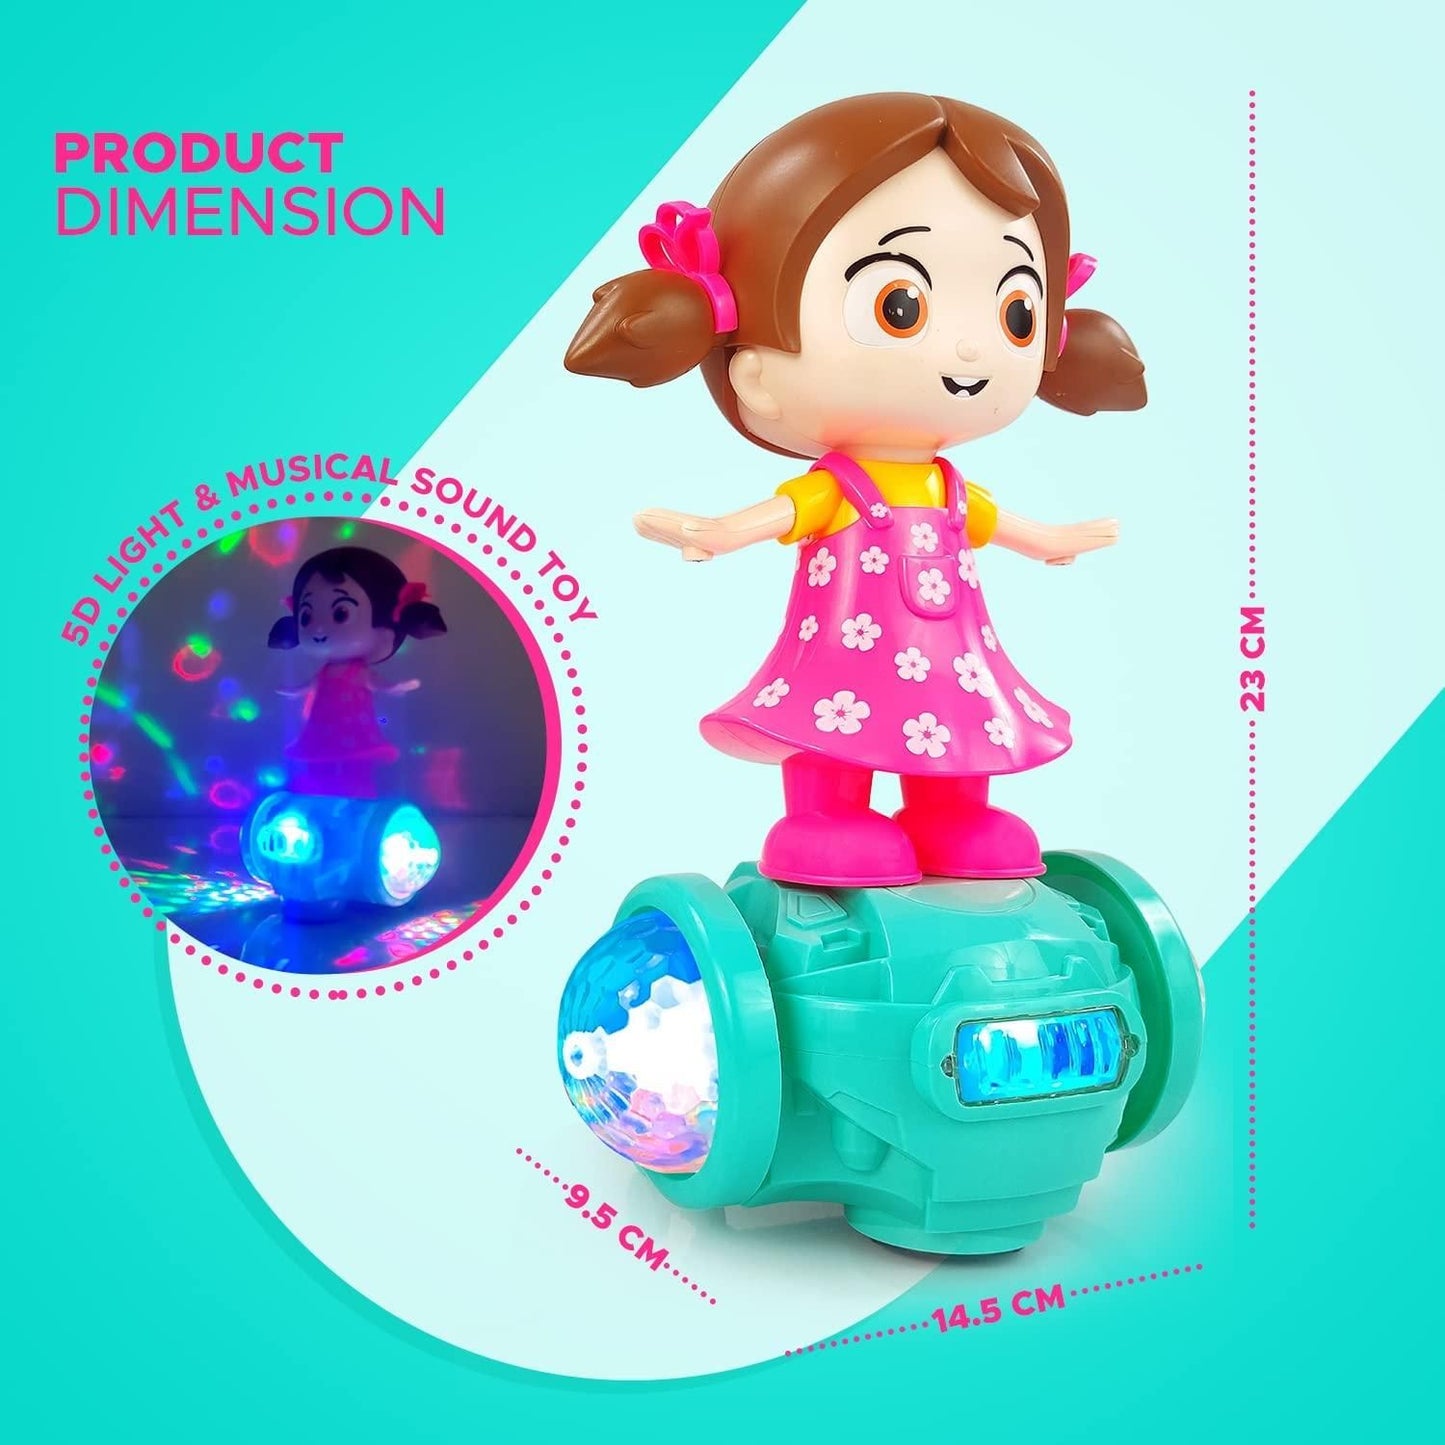 Dancing Doll Toy with Music & Lights